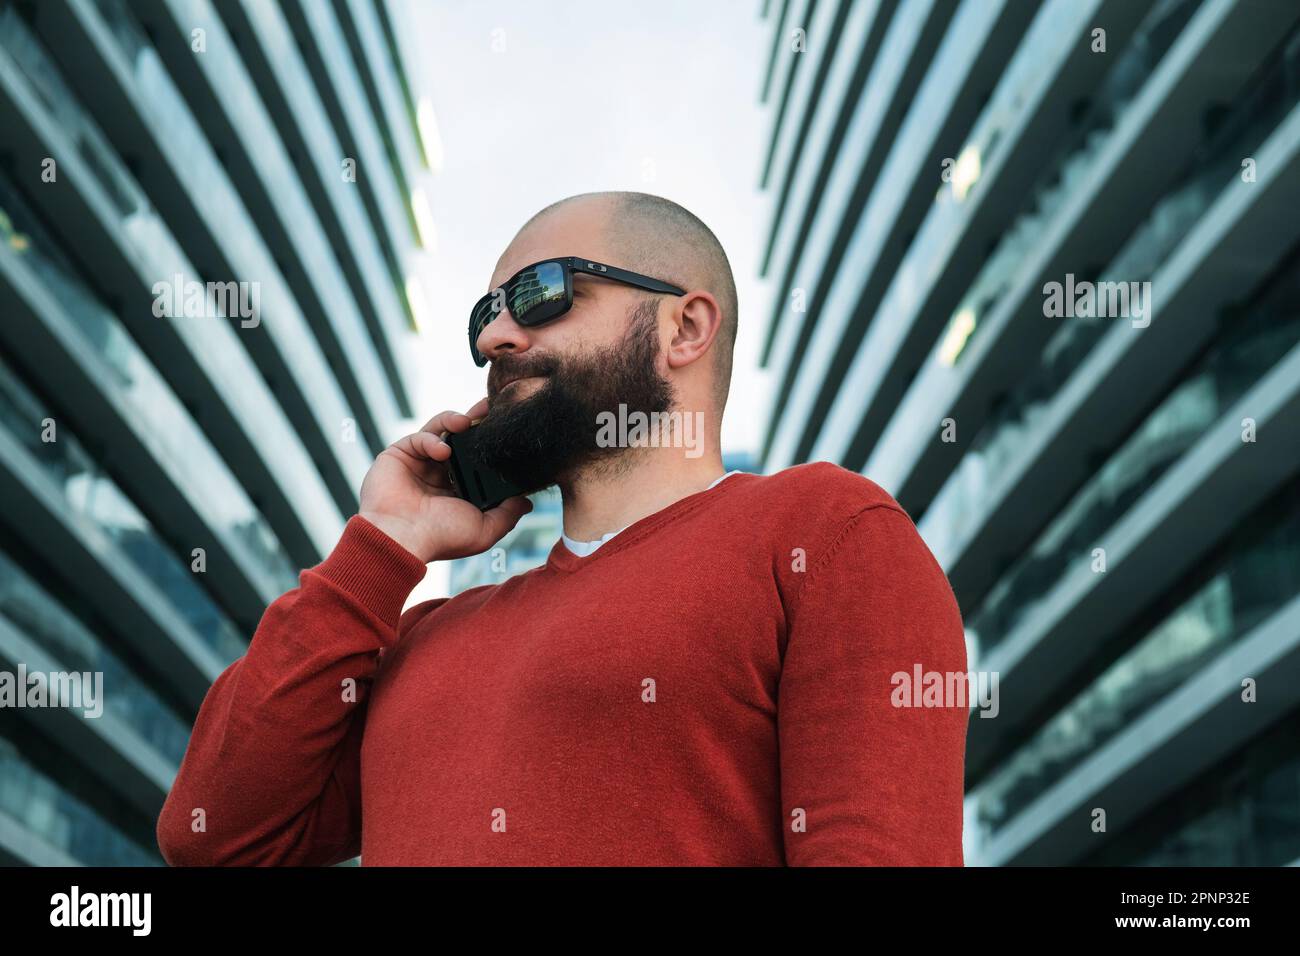 Bearded man in sunglasses talking on mobile phone outdoor the modern office buildings. IT guy or freelancer using mobile phone. Close up Stock Photo